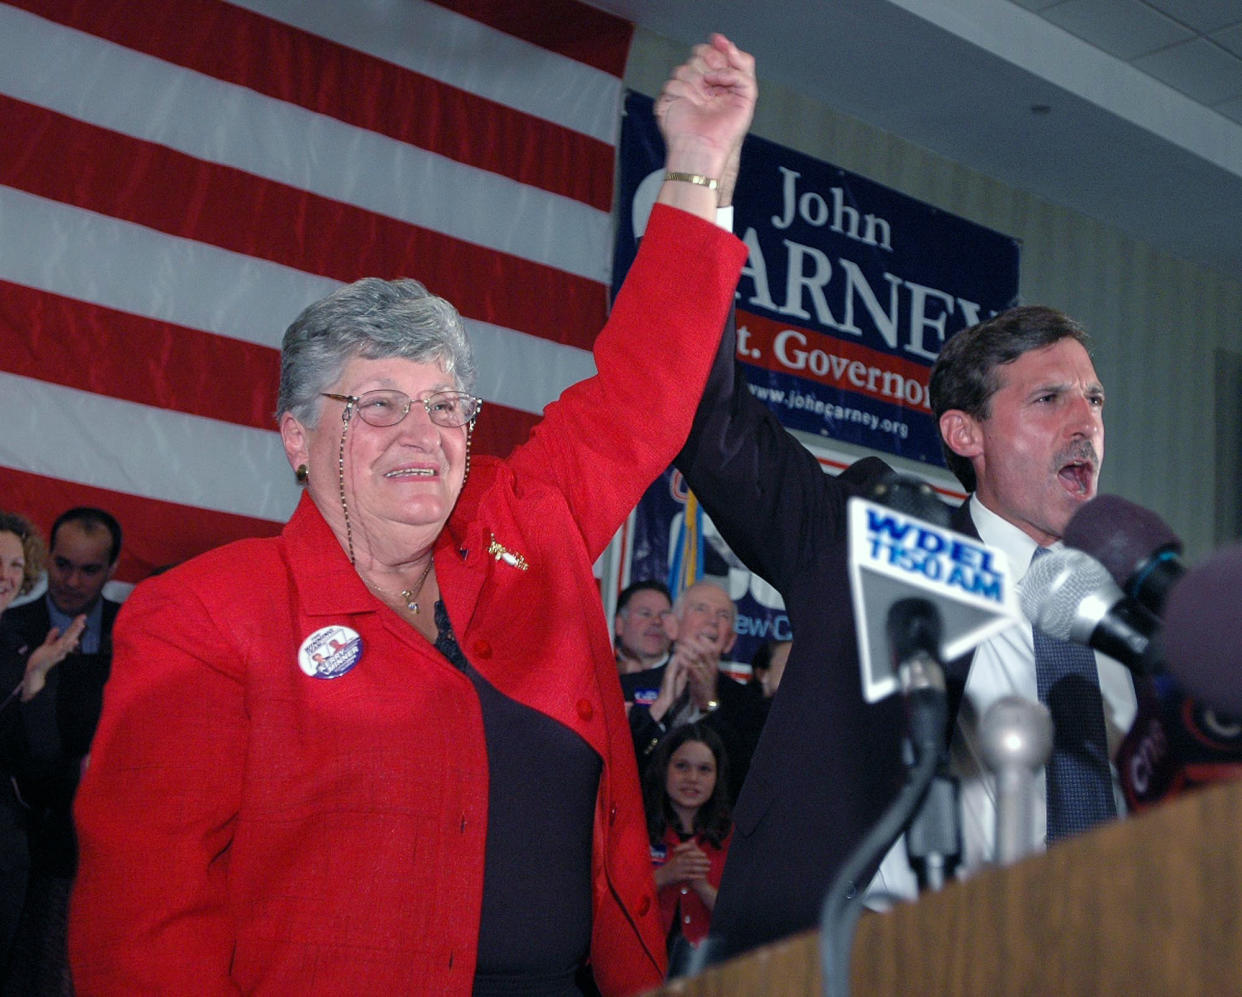 FILE - Delaware Gov. Ruth Ann Minner, left, and Lt. Gov. John Carney raise their arms in victory as they celebrate winning their respective races Tuesday, Nov. 2, 2004, in Wilmington, Del. Ann Minner, a sharecropper's daughter who became the only woman to serve as Delaware's governor, died on Nov. 4, 2021. (AP Photo/Pat Crowe II, File)